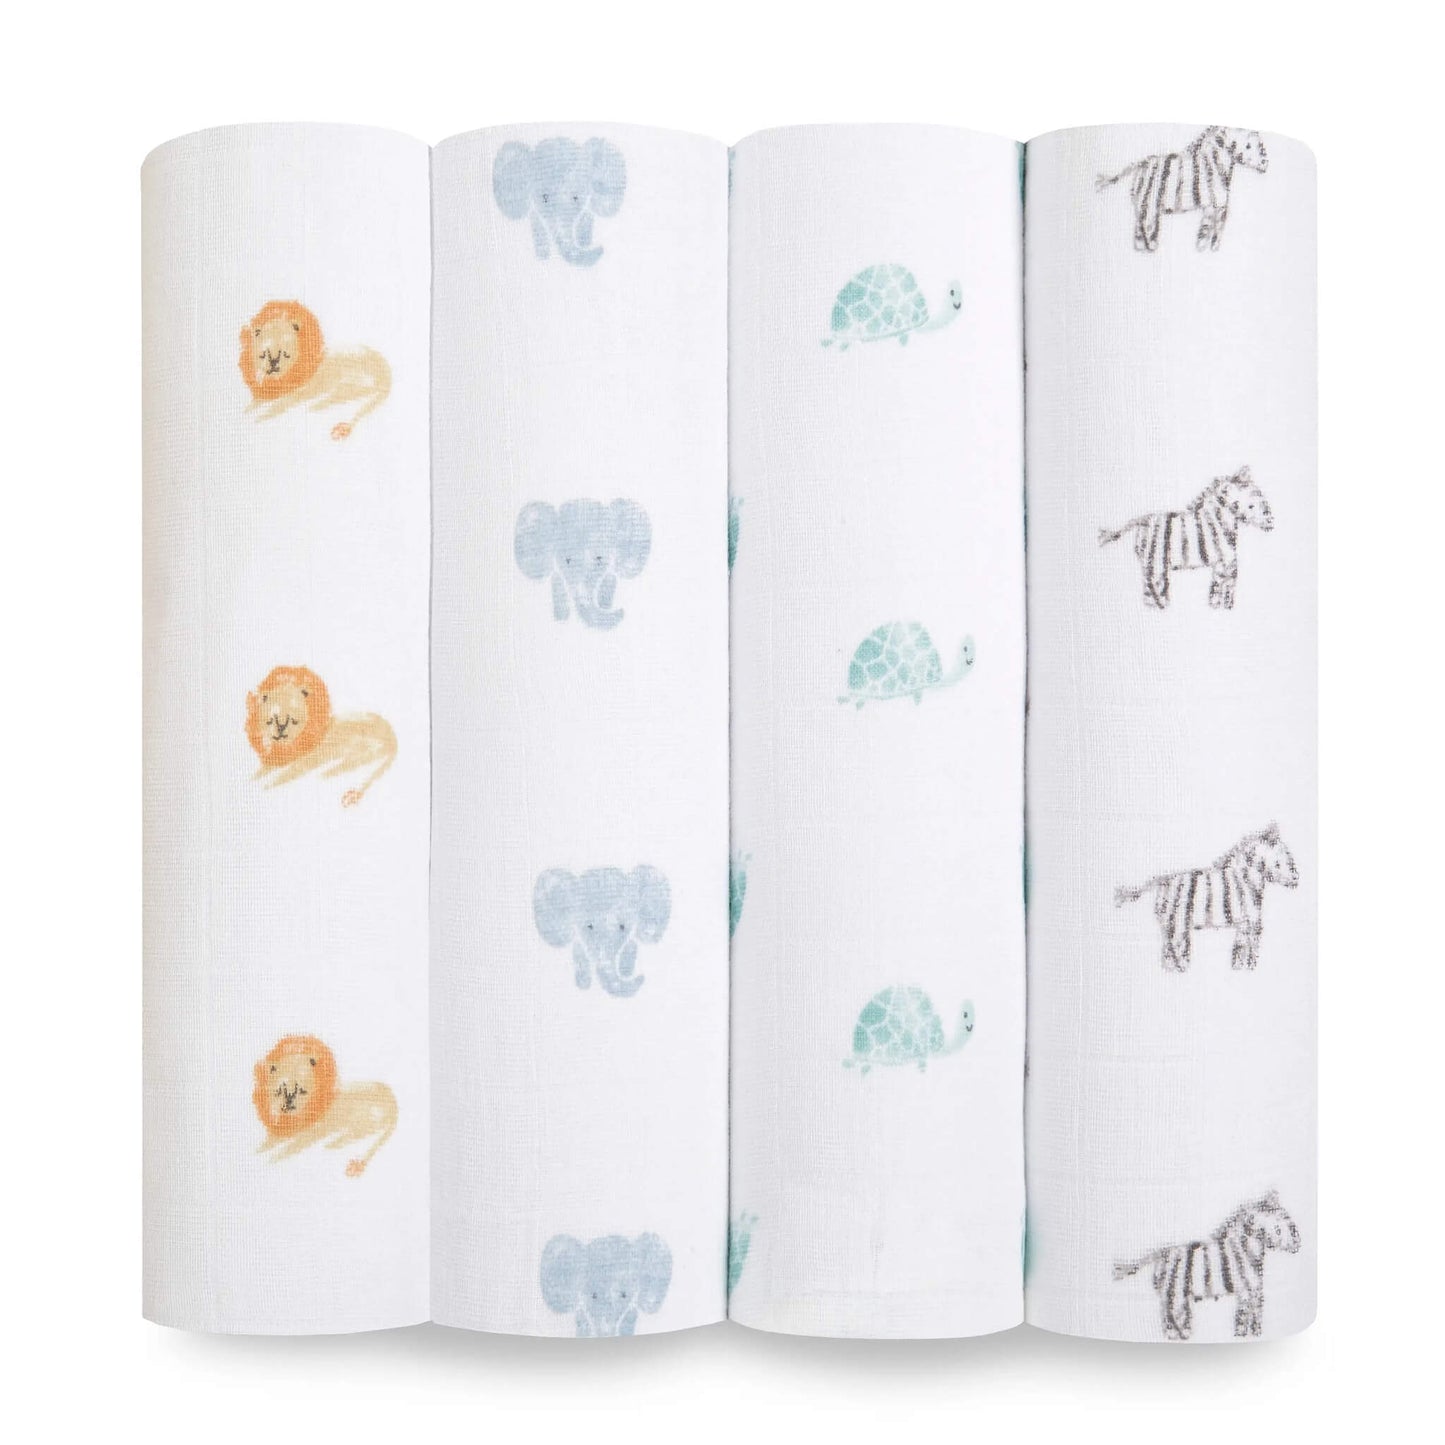 Soft, sustainable GOTS certified pack of 4 organic cotton swaddles by aden + anais.